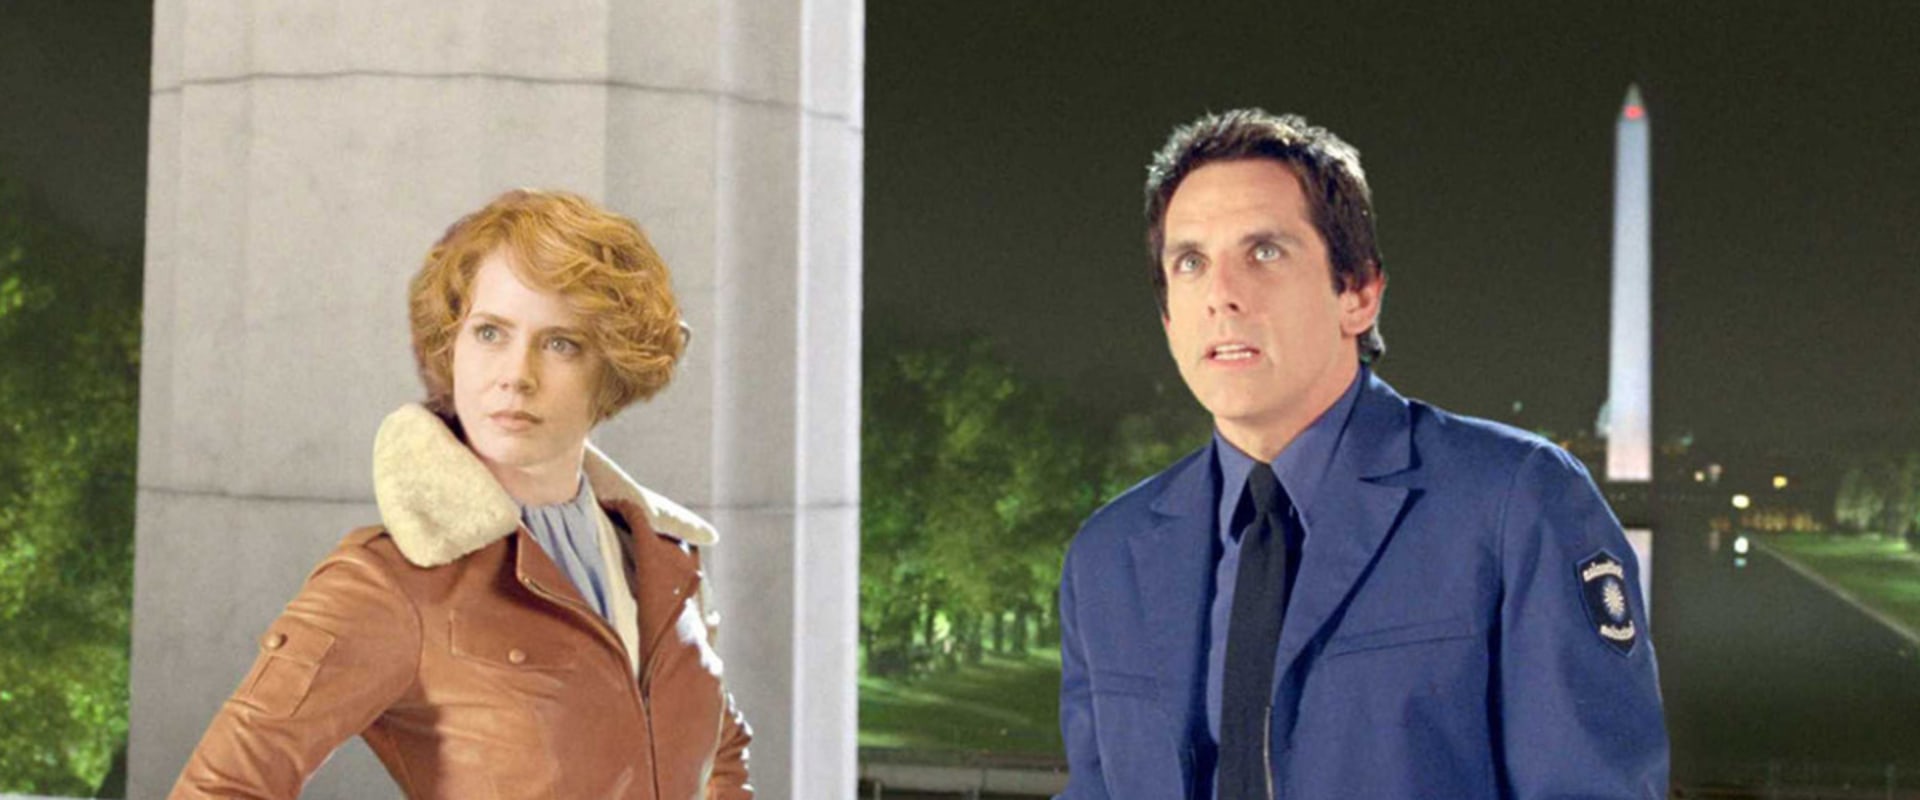 Did Tom Cruise Star in Night at the Museum?